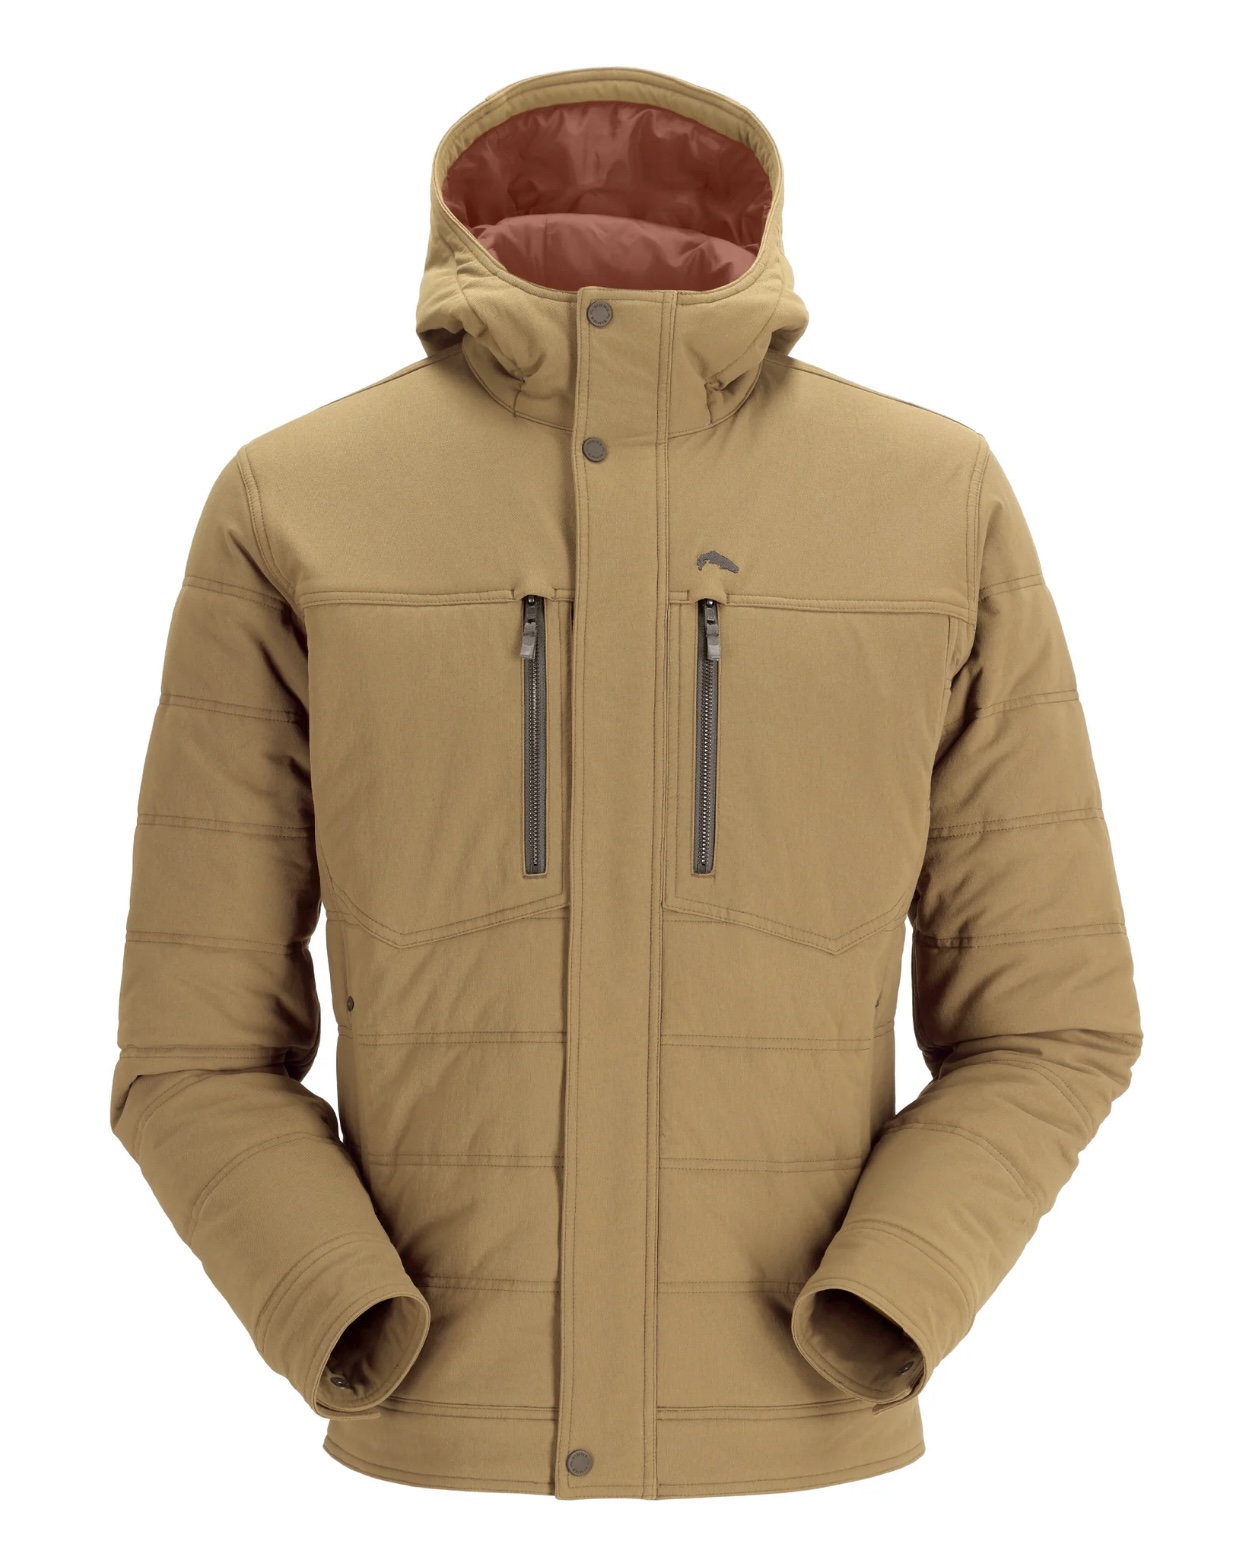 Simms M's Cardwell Hooded Jacket - Camel - XL